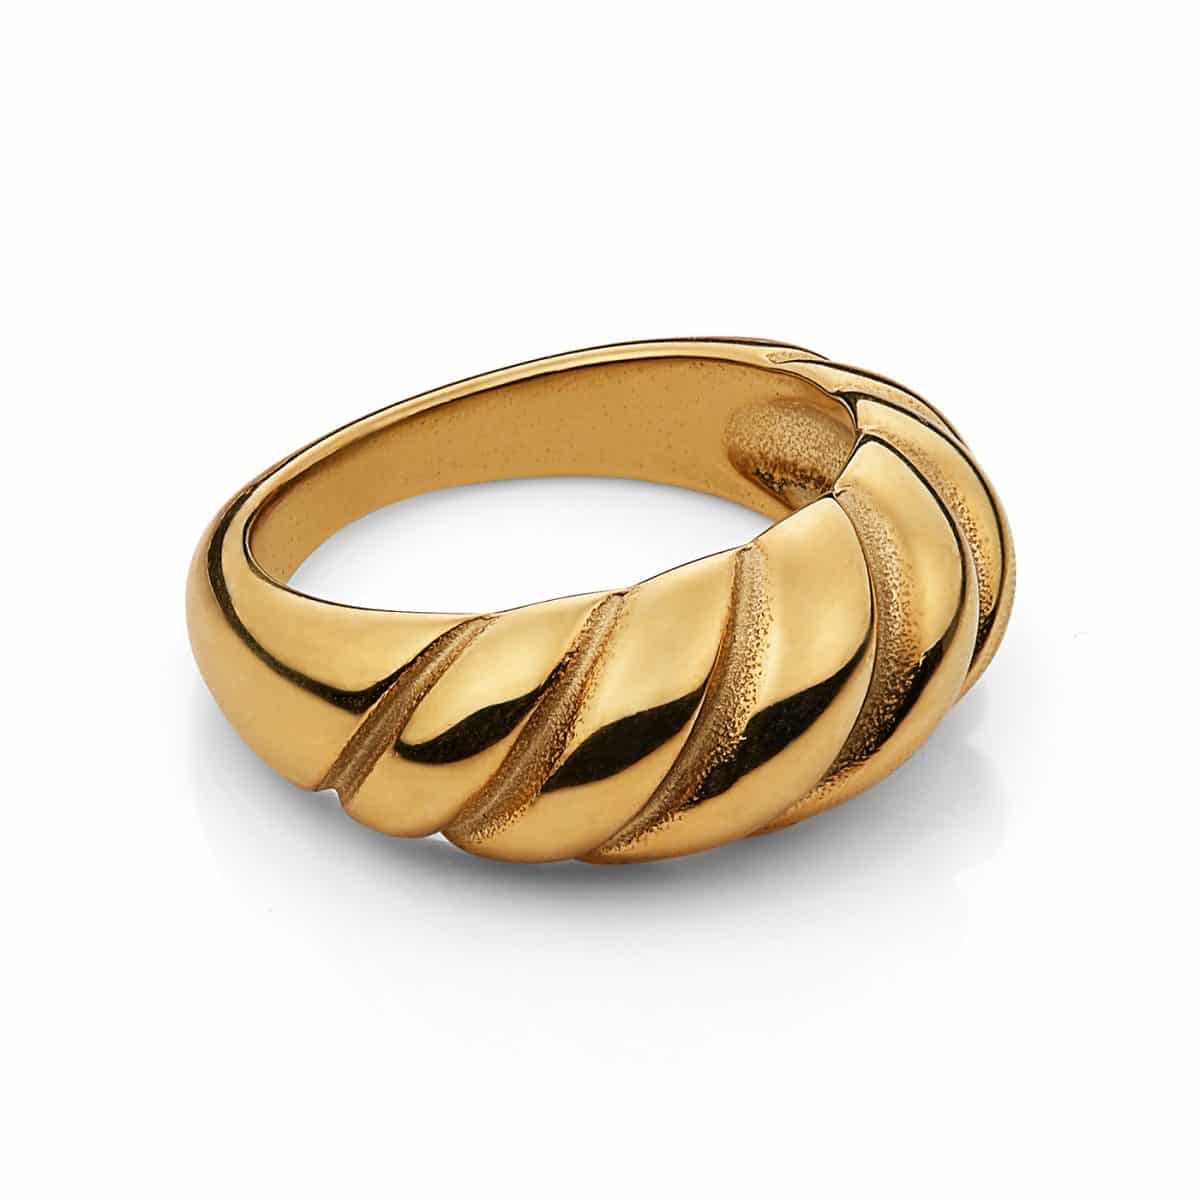 Twist Gold Ring Twist Ring Stackable Ring Twisted Dome Ring Croissant Ring Dome Ring Croissant Dome Ring Statement Ring Thick Gold